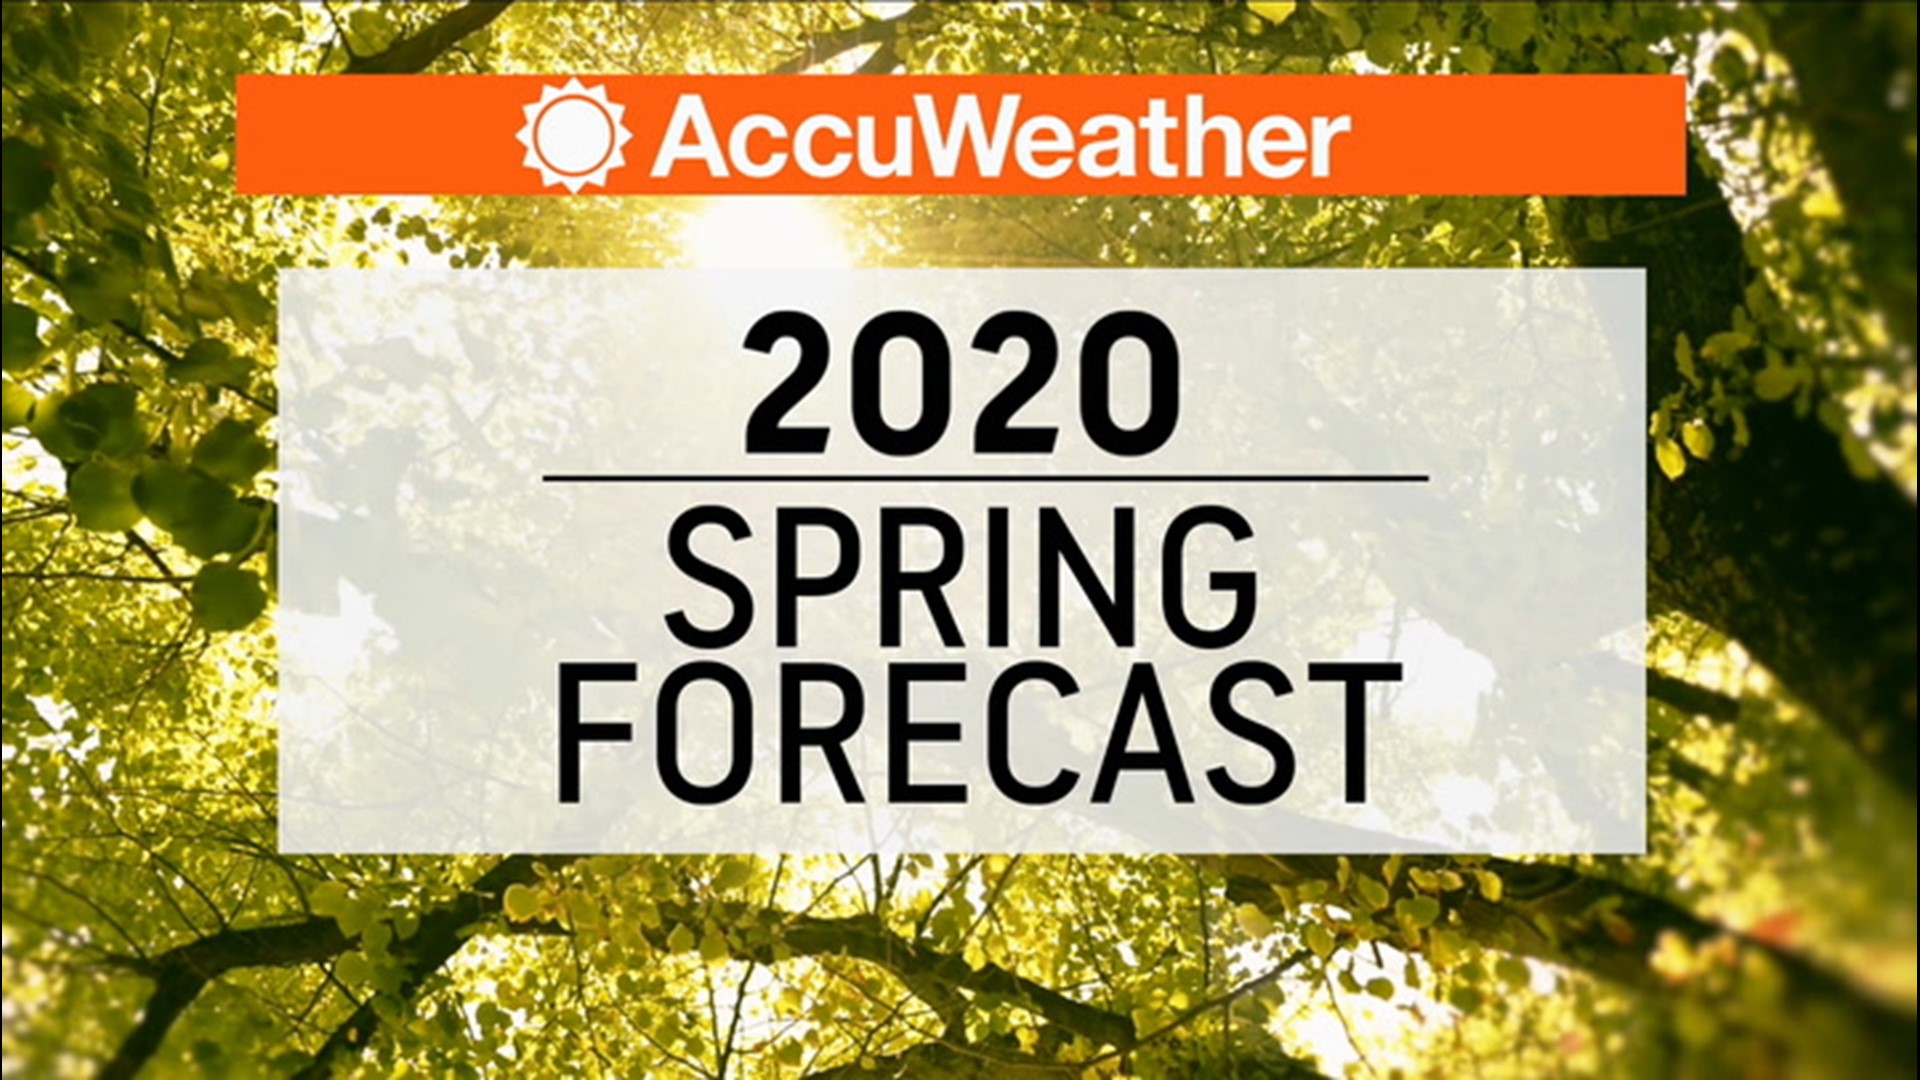 Punxsutawney Phil may have predicted an early spring, but for many, AccuWeather's meteorologists say not so fast.